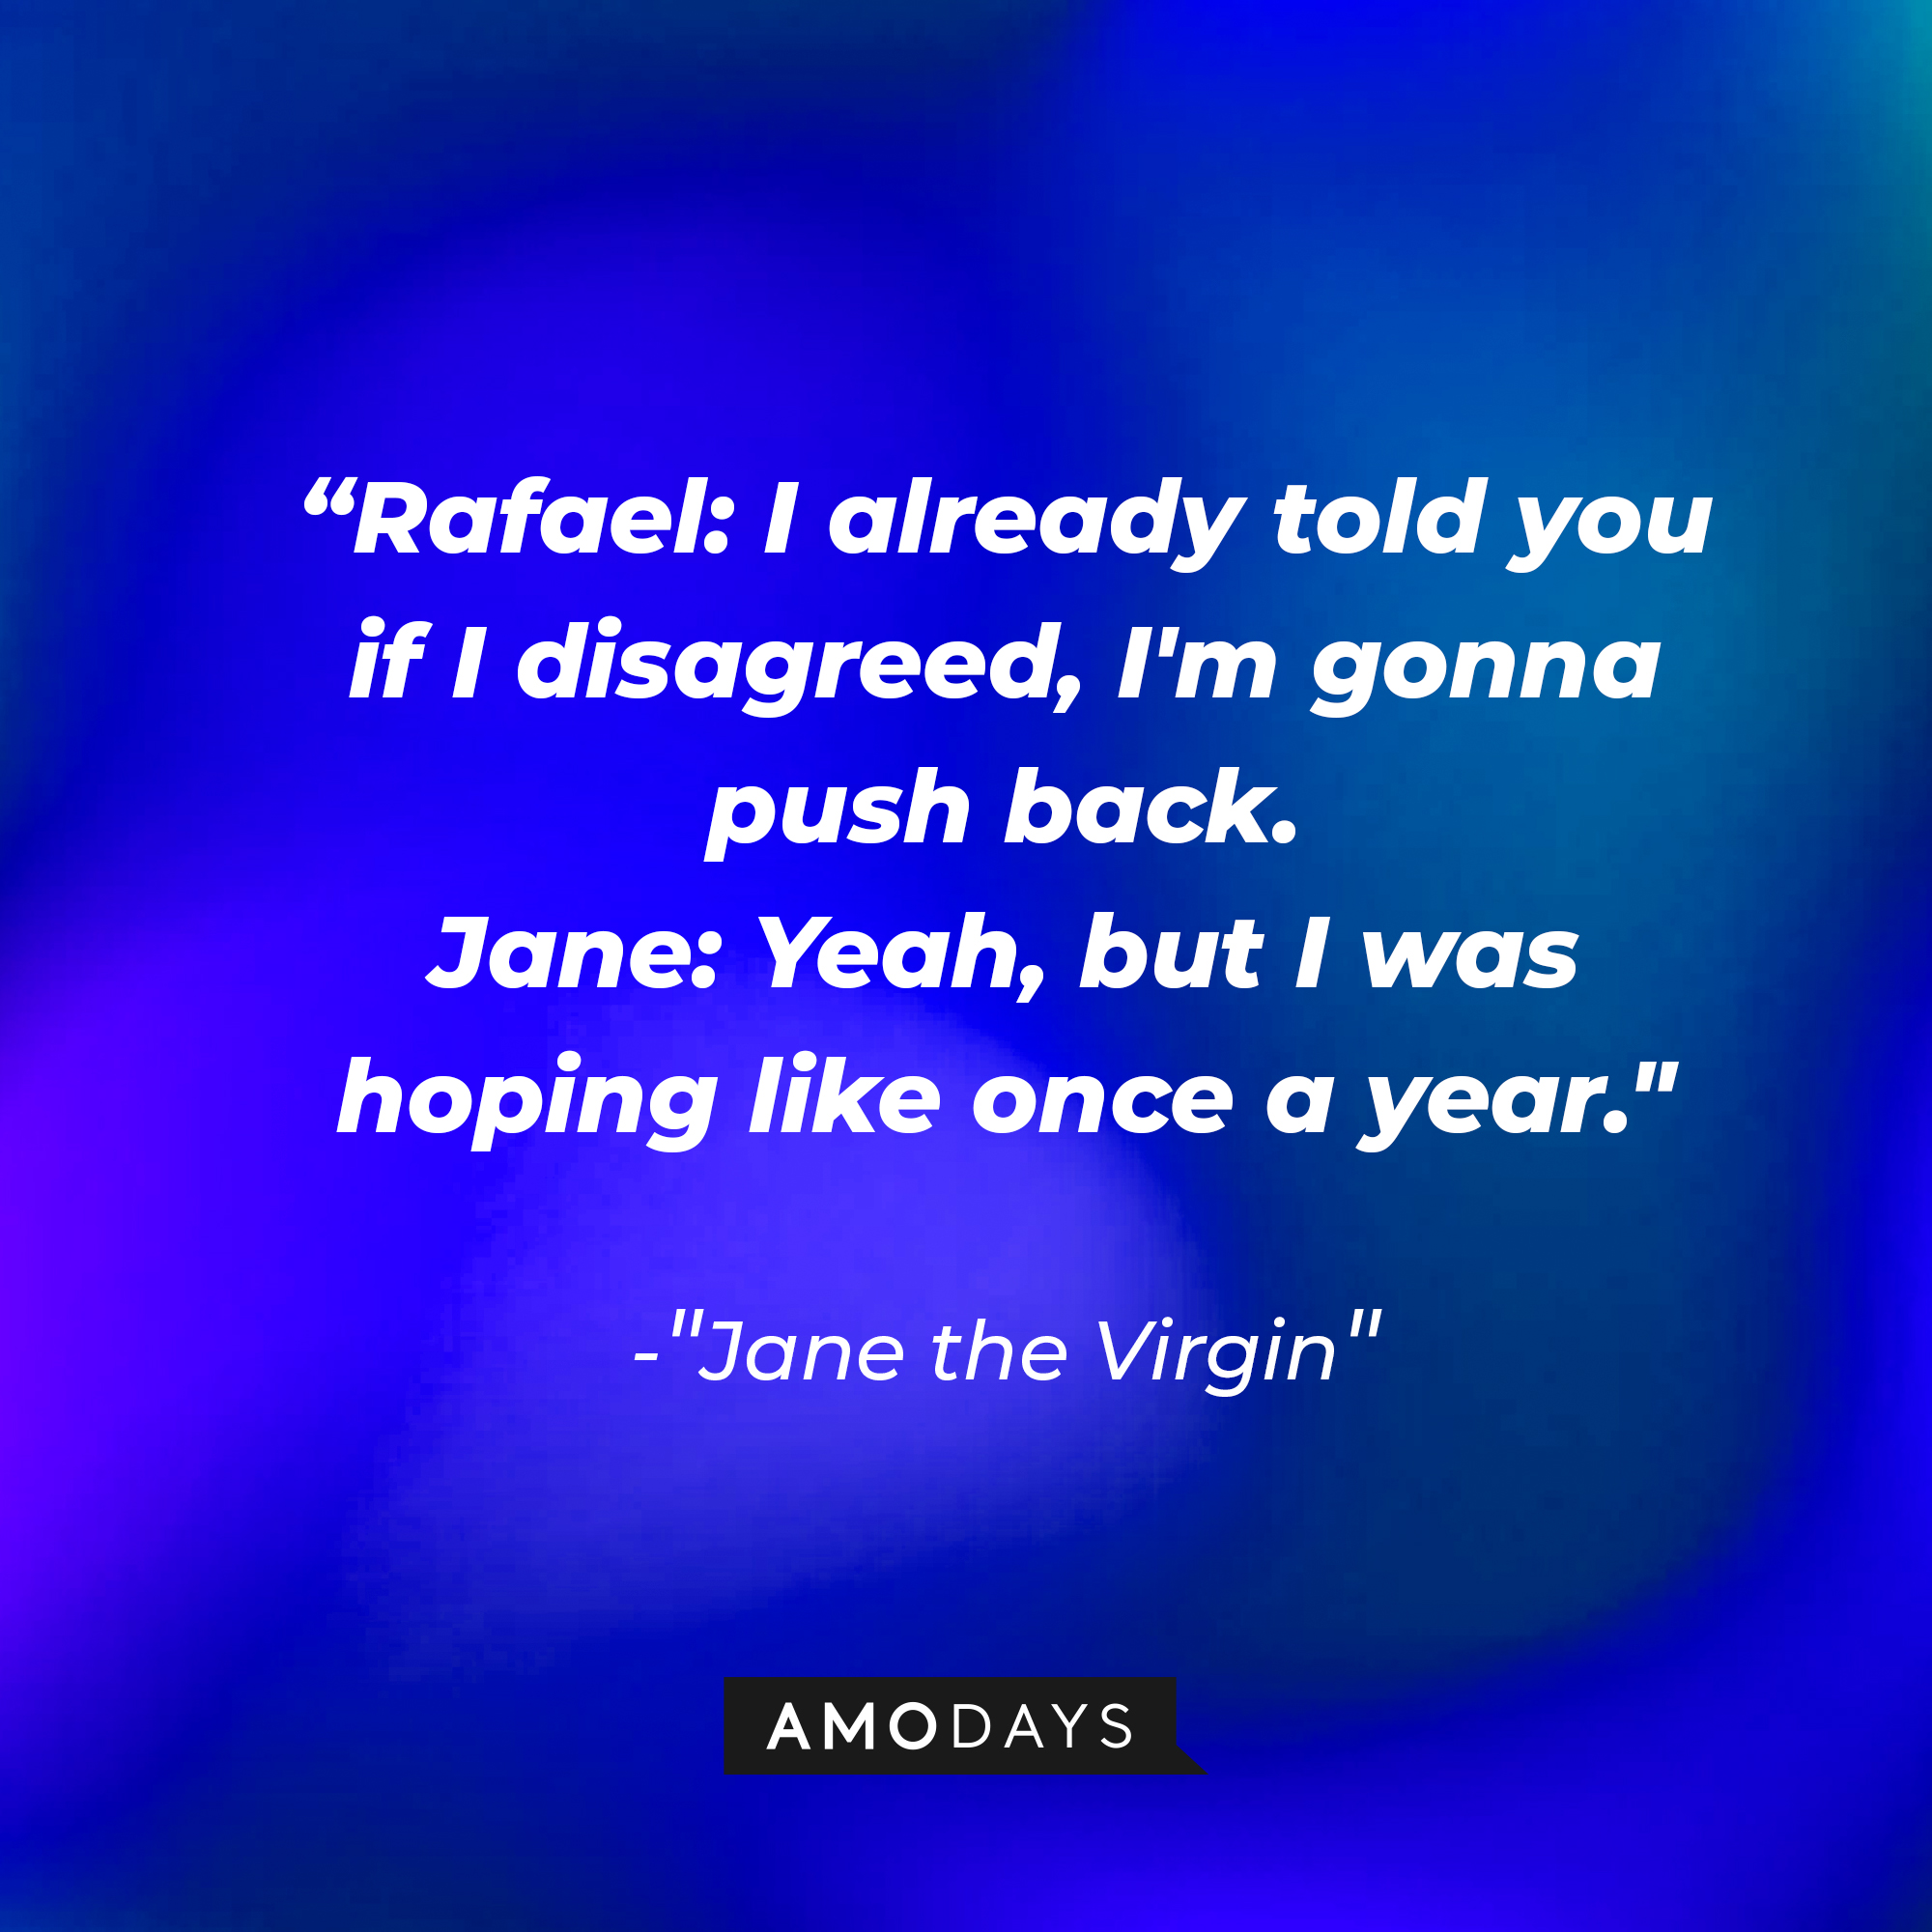 Jane Villanueva's dialogue in "Jane the Virgin:" “Rafael: I already told you if I disagreed, I'm gonna push back ; Jane: Yeah, but I was hoping like once a year." | Source: Amodays